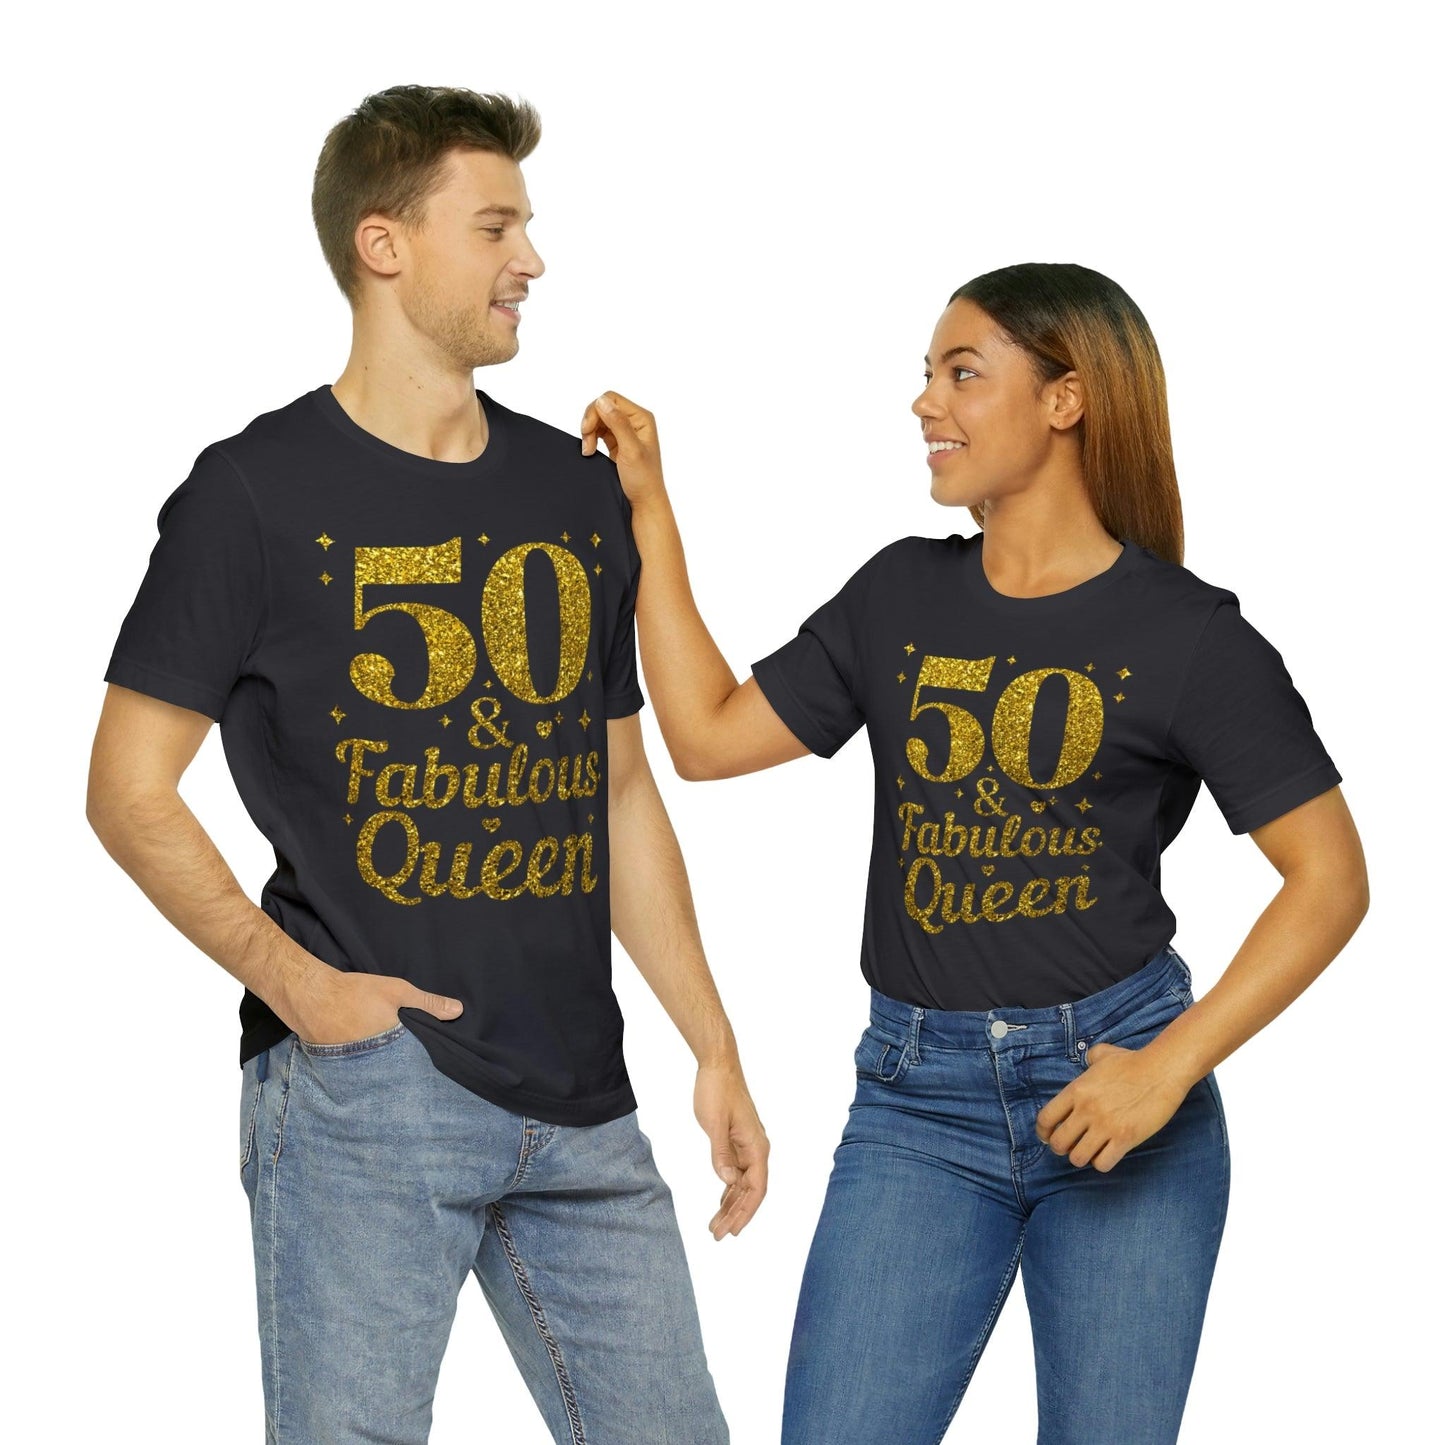 50 and Fabulous Queen shirt, Funny 50th birthday shirt, 50th birthday Tshirt, birthday queen shirt, Gift for 50th birthday, Vintage shirt, birthday gift, birthday girl shirt, mom’s birthday gift - Giftsmojo